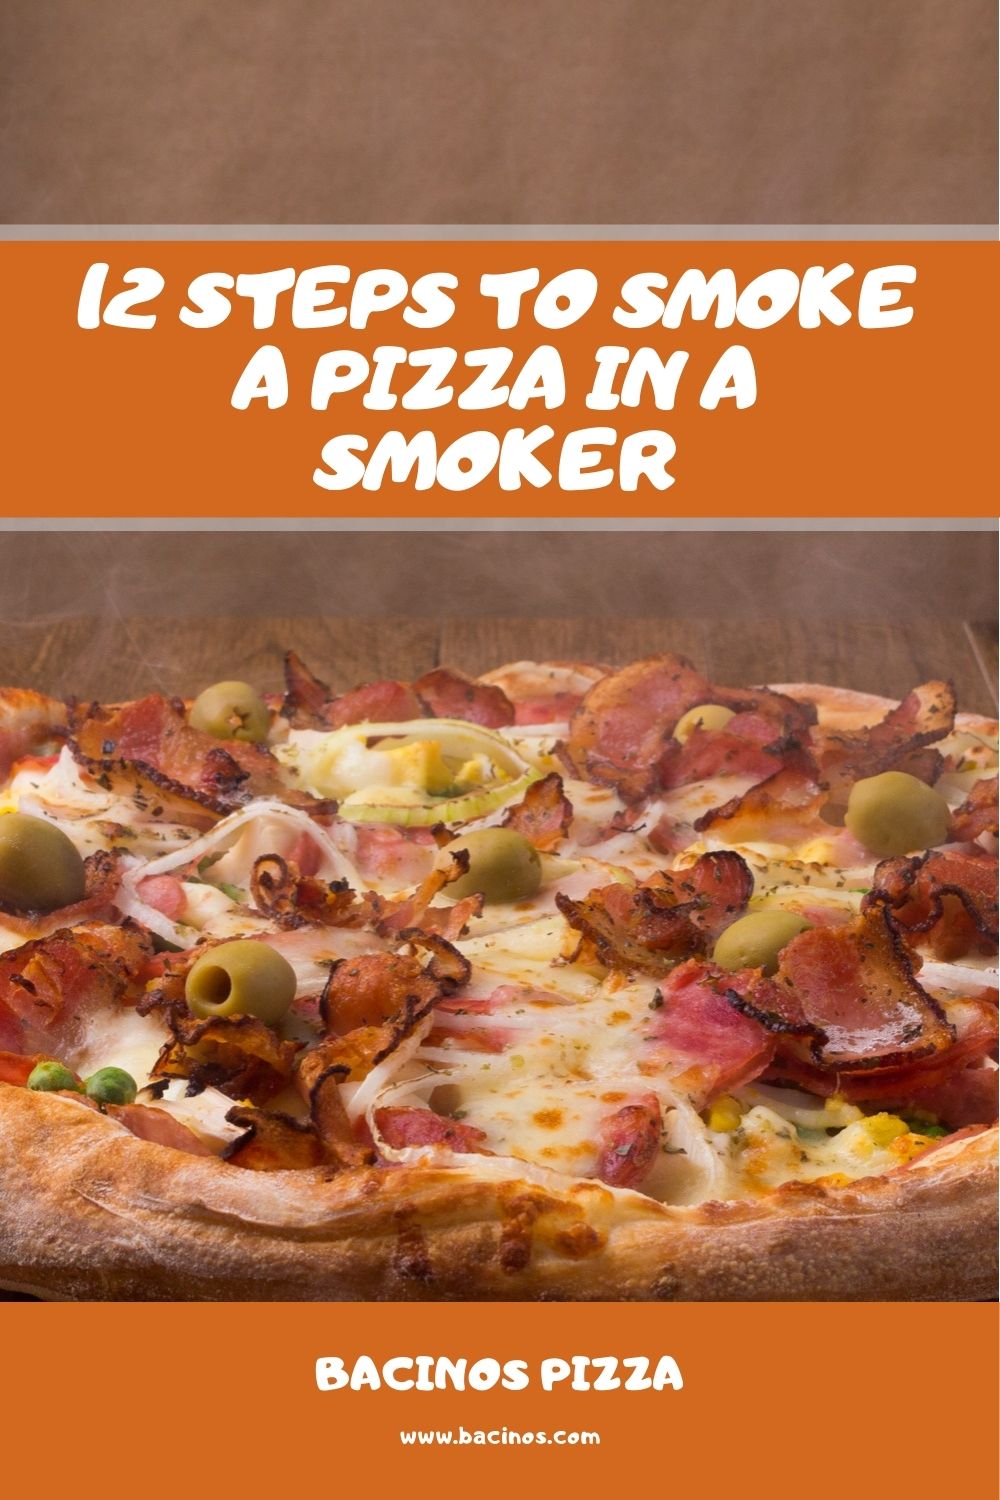 12 Steps to Smoke a Pizza in a Smoker 1